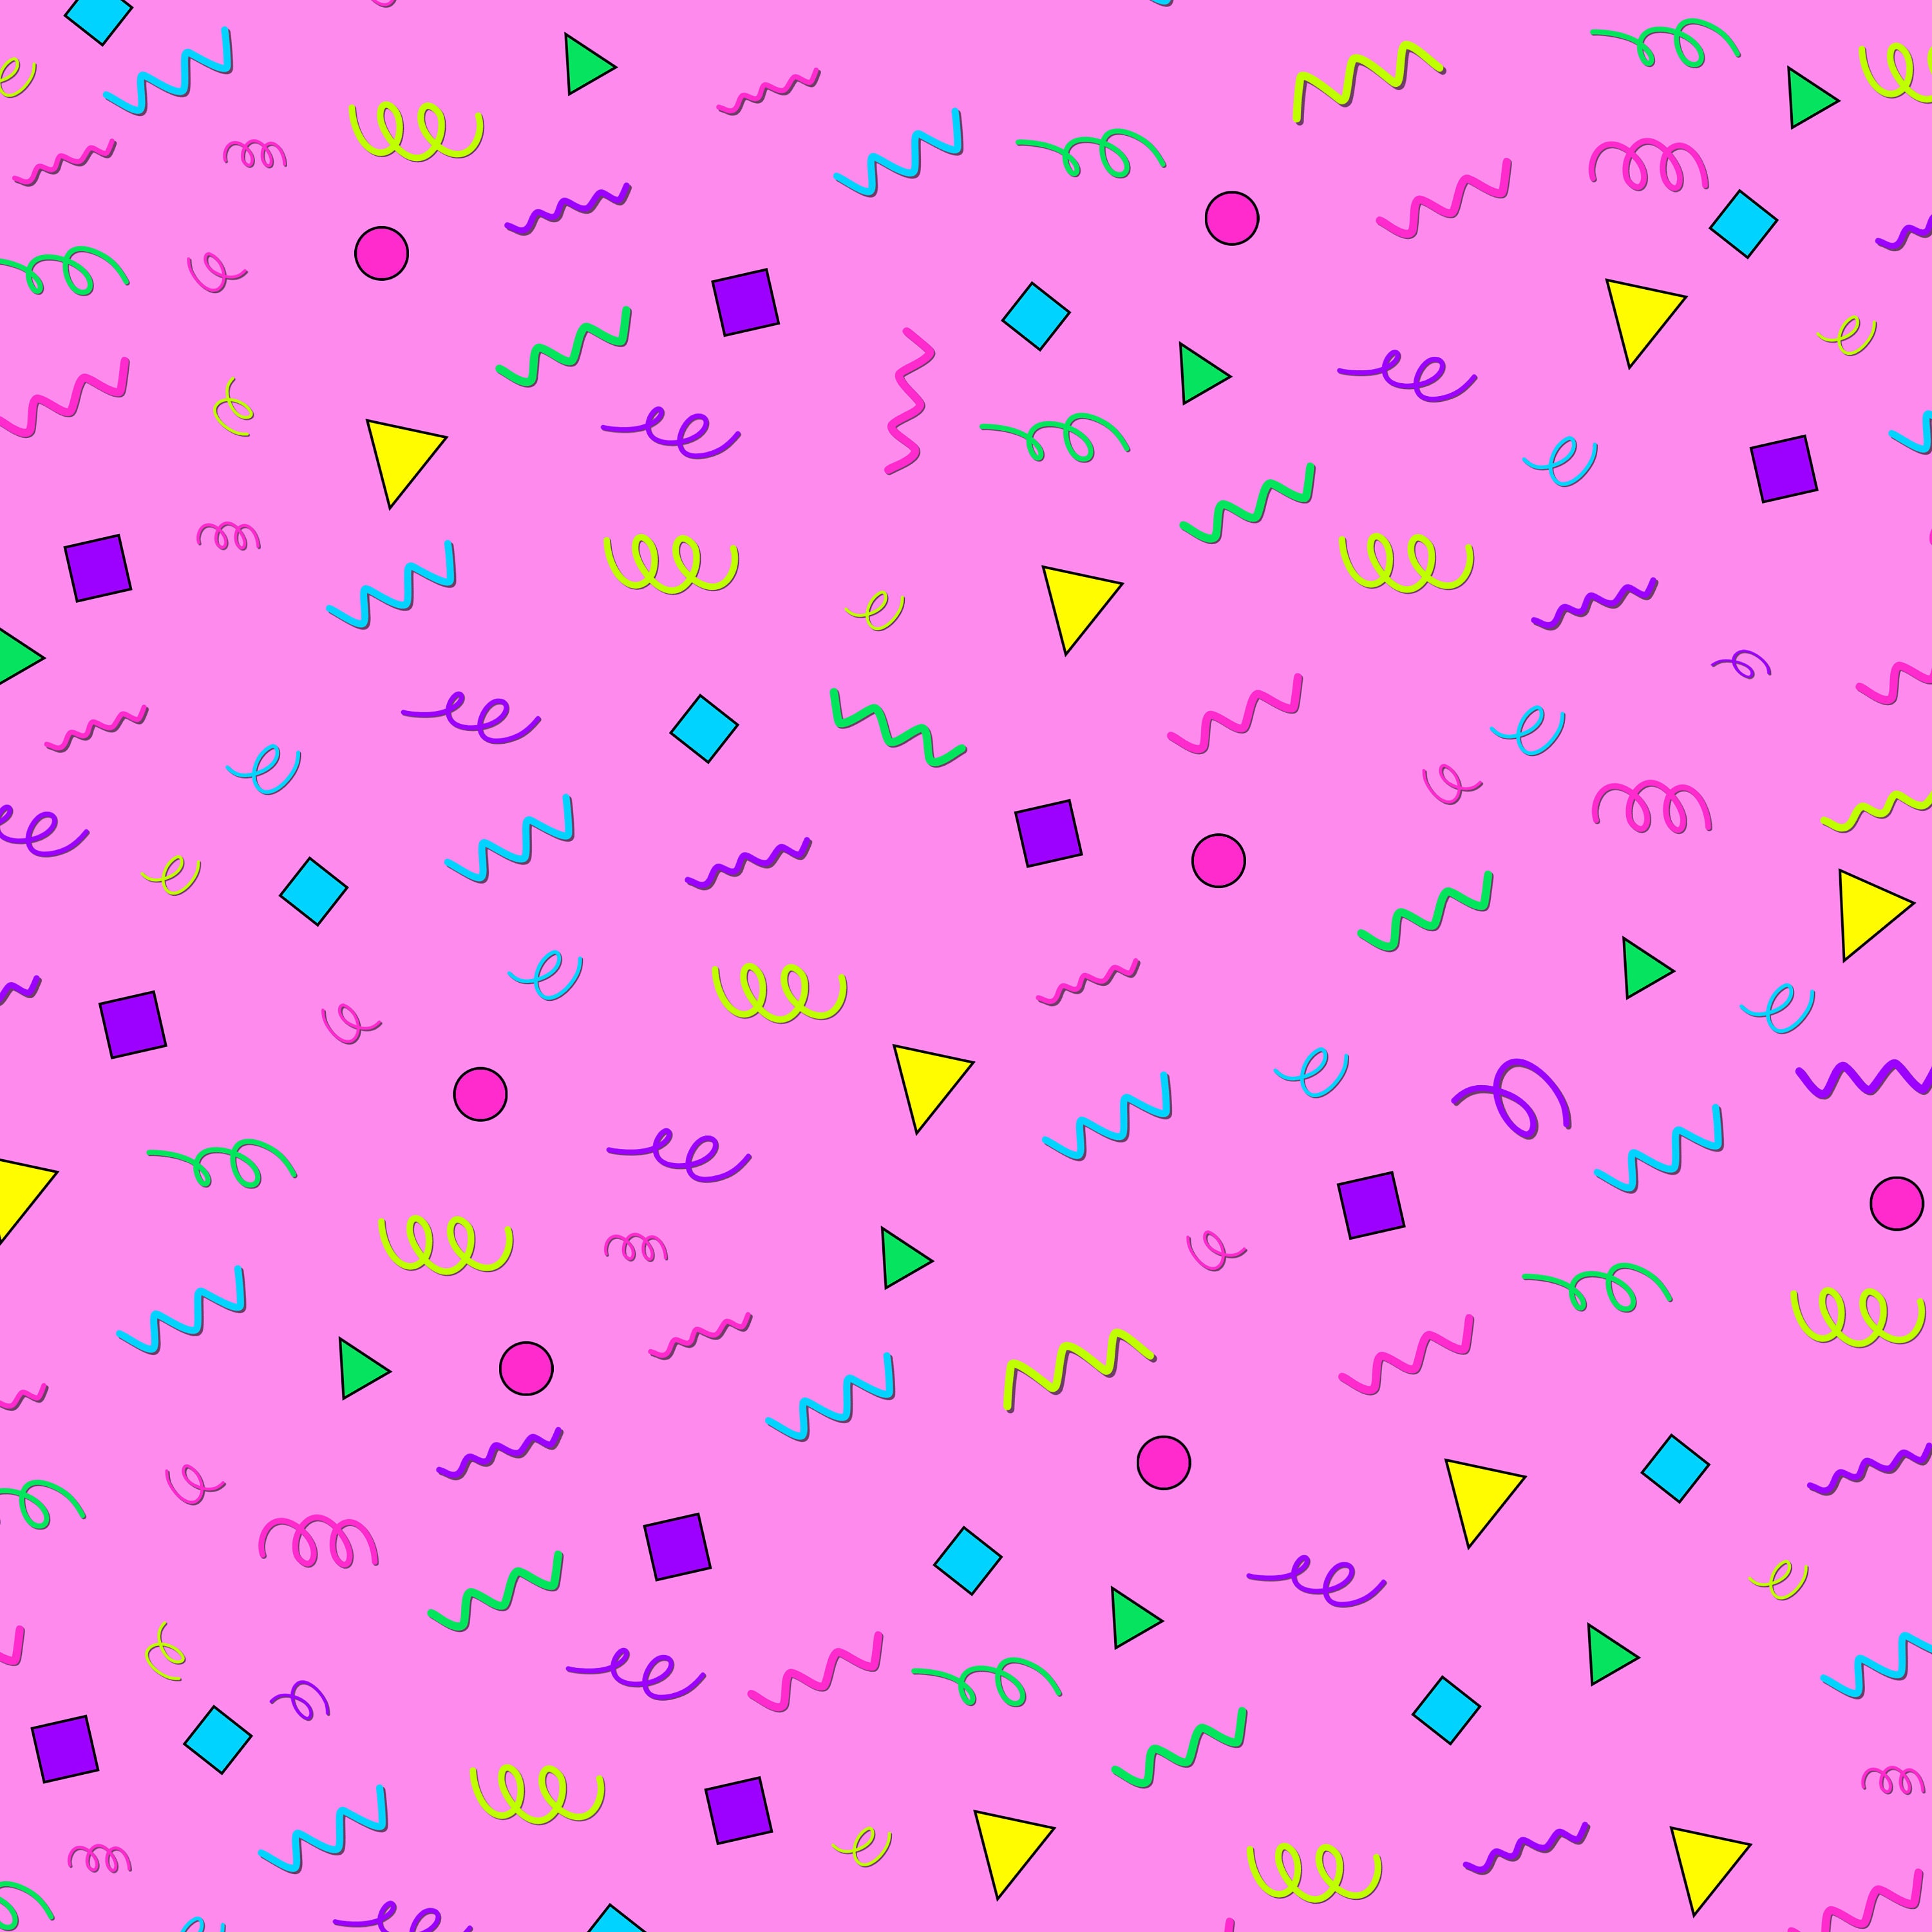 y2k, wallpaper and 90s aesthetic - image #8782084 on